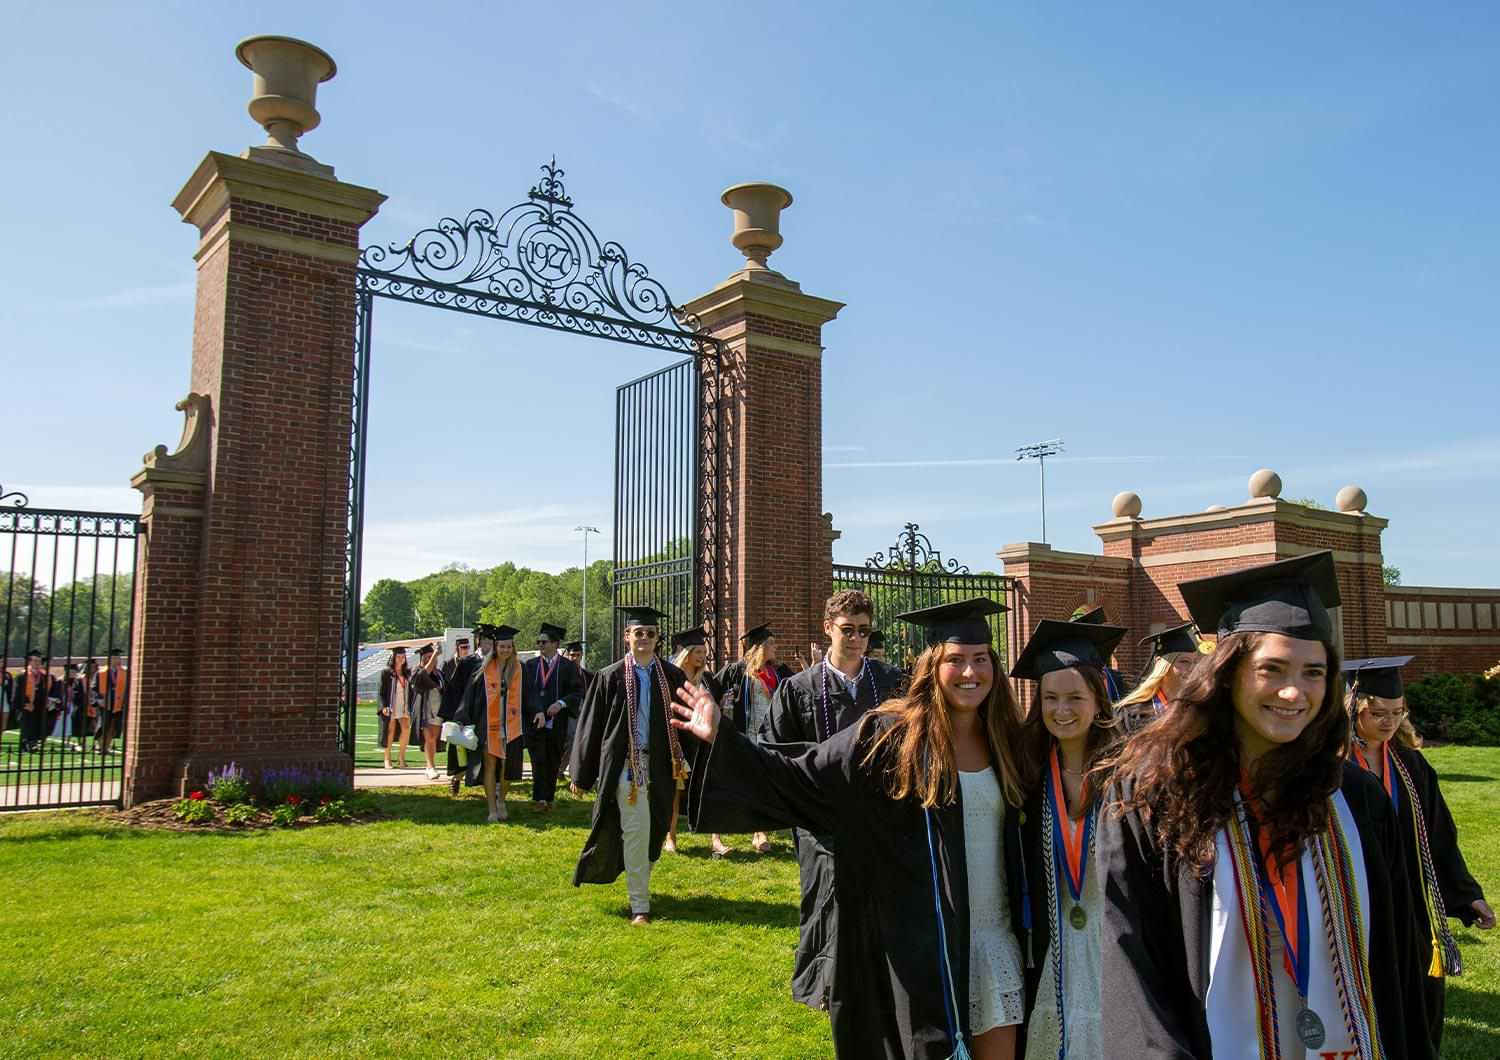 Bucknell graduates smile and wave as they process through the Christy Mathewson-Memorial Gateway on a bright day